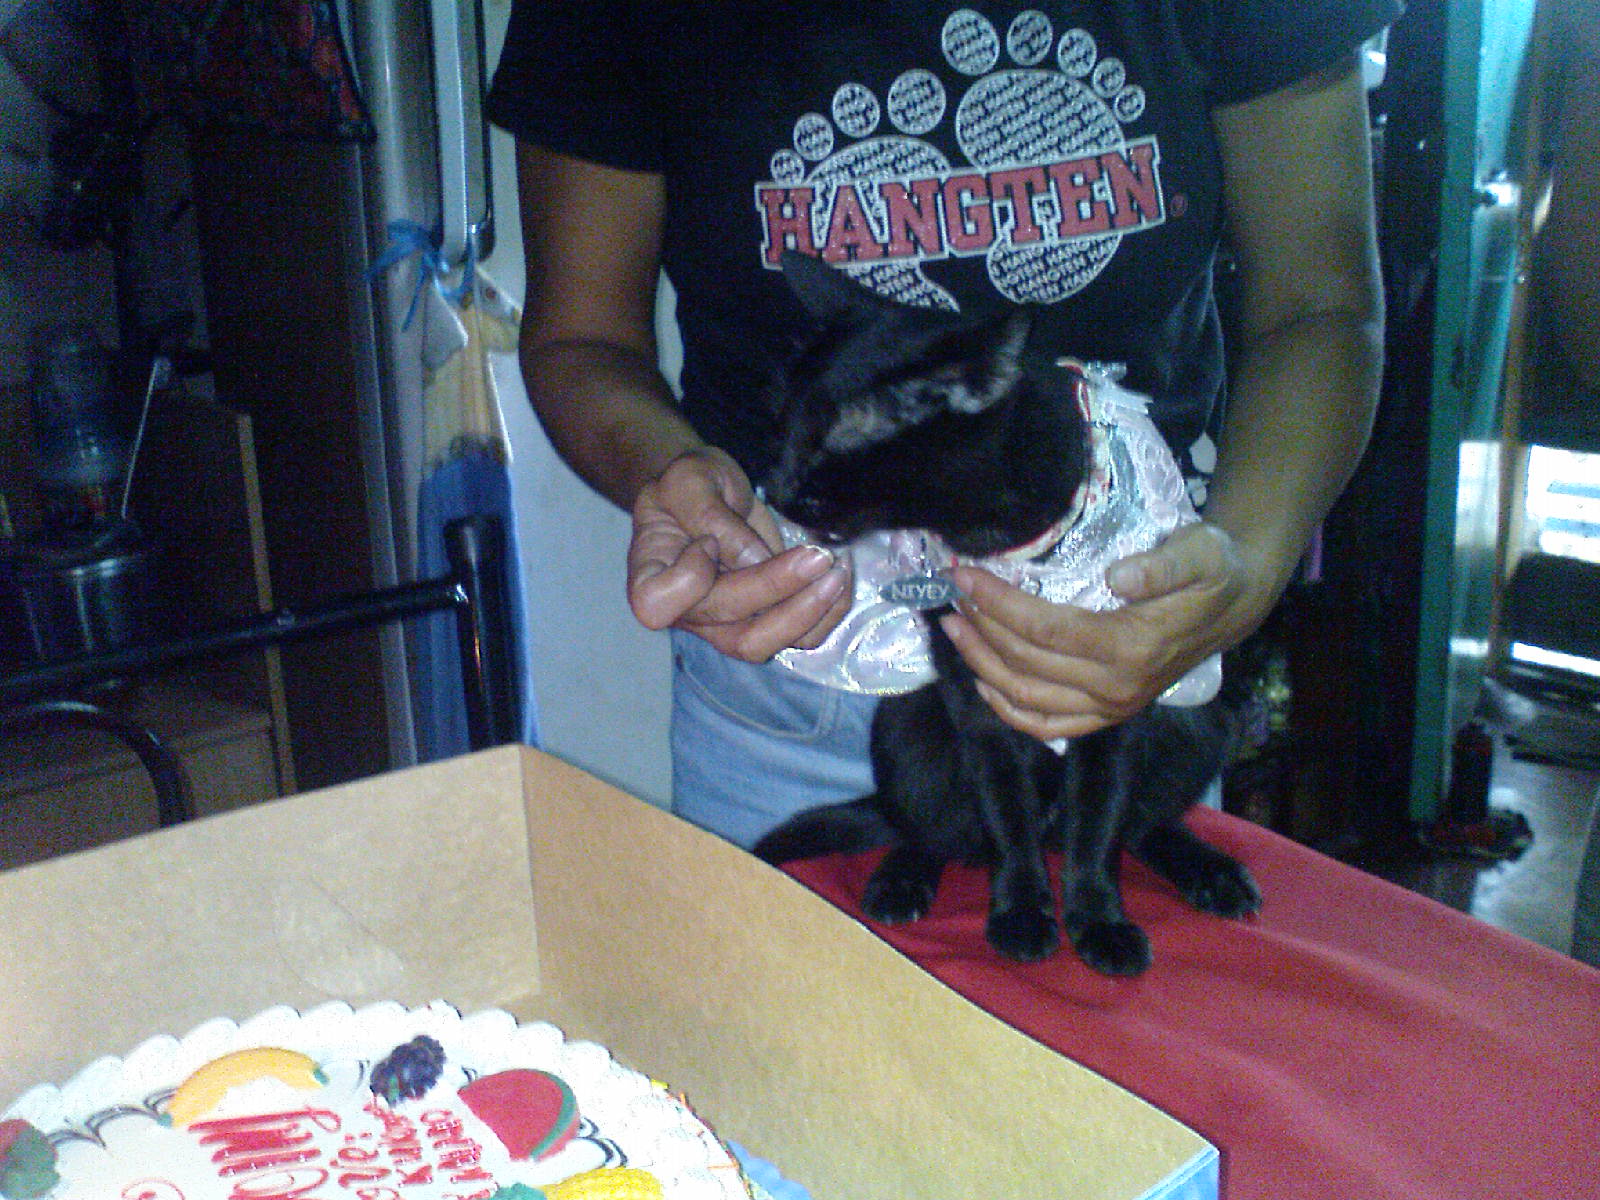 My little princess, eating cake icing